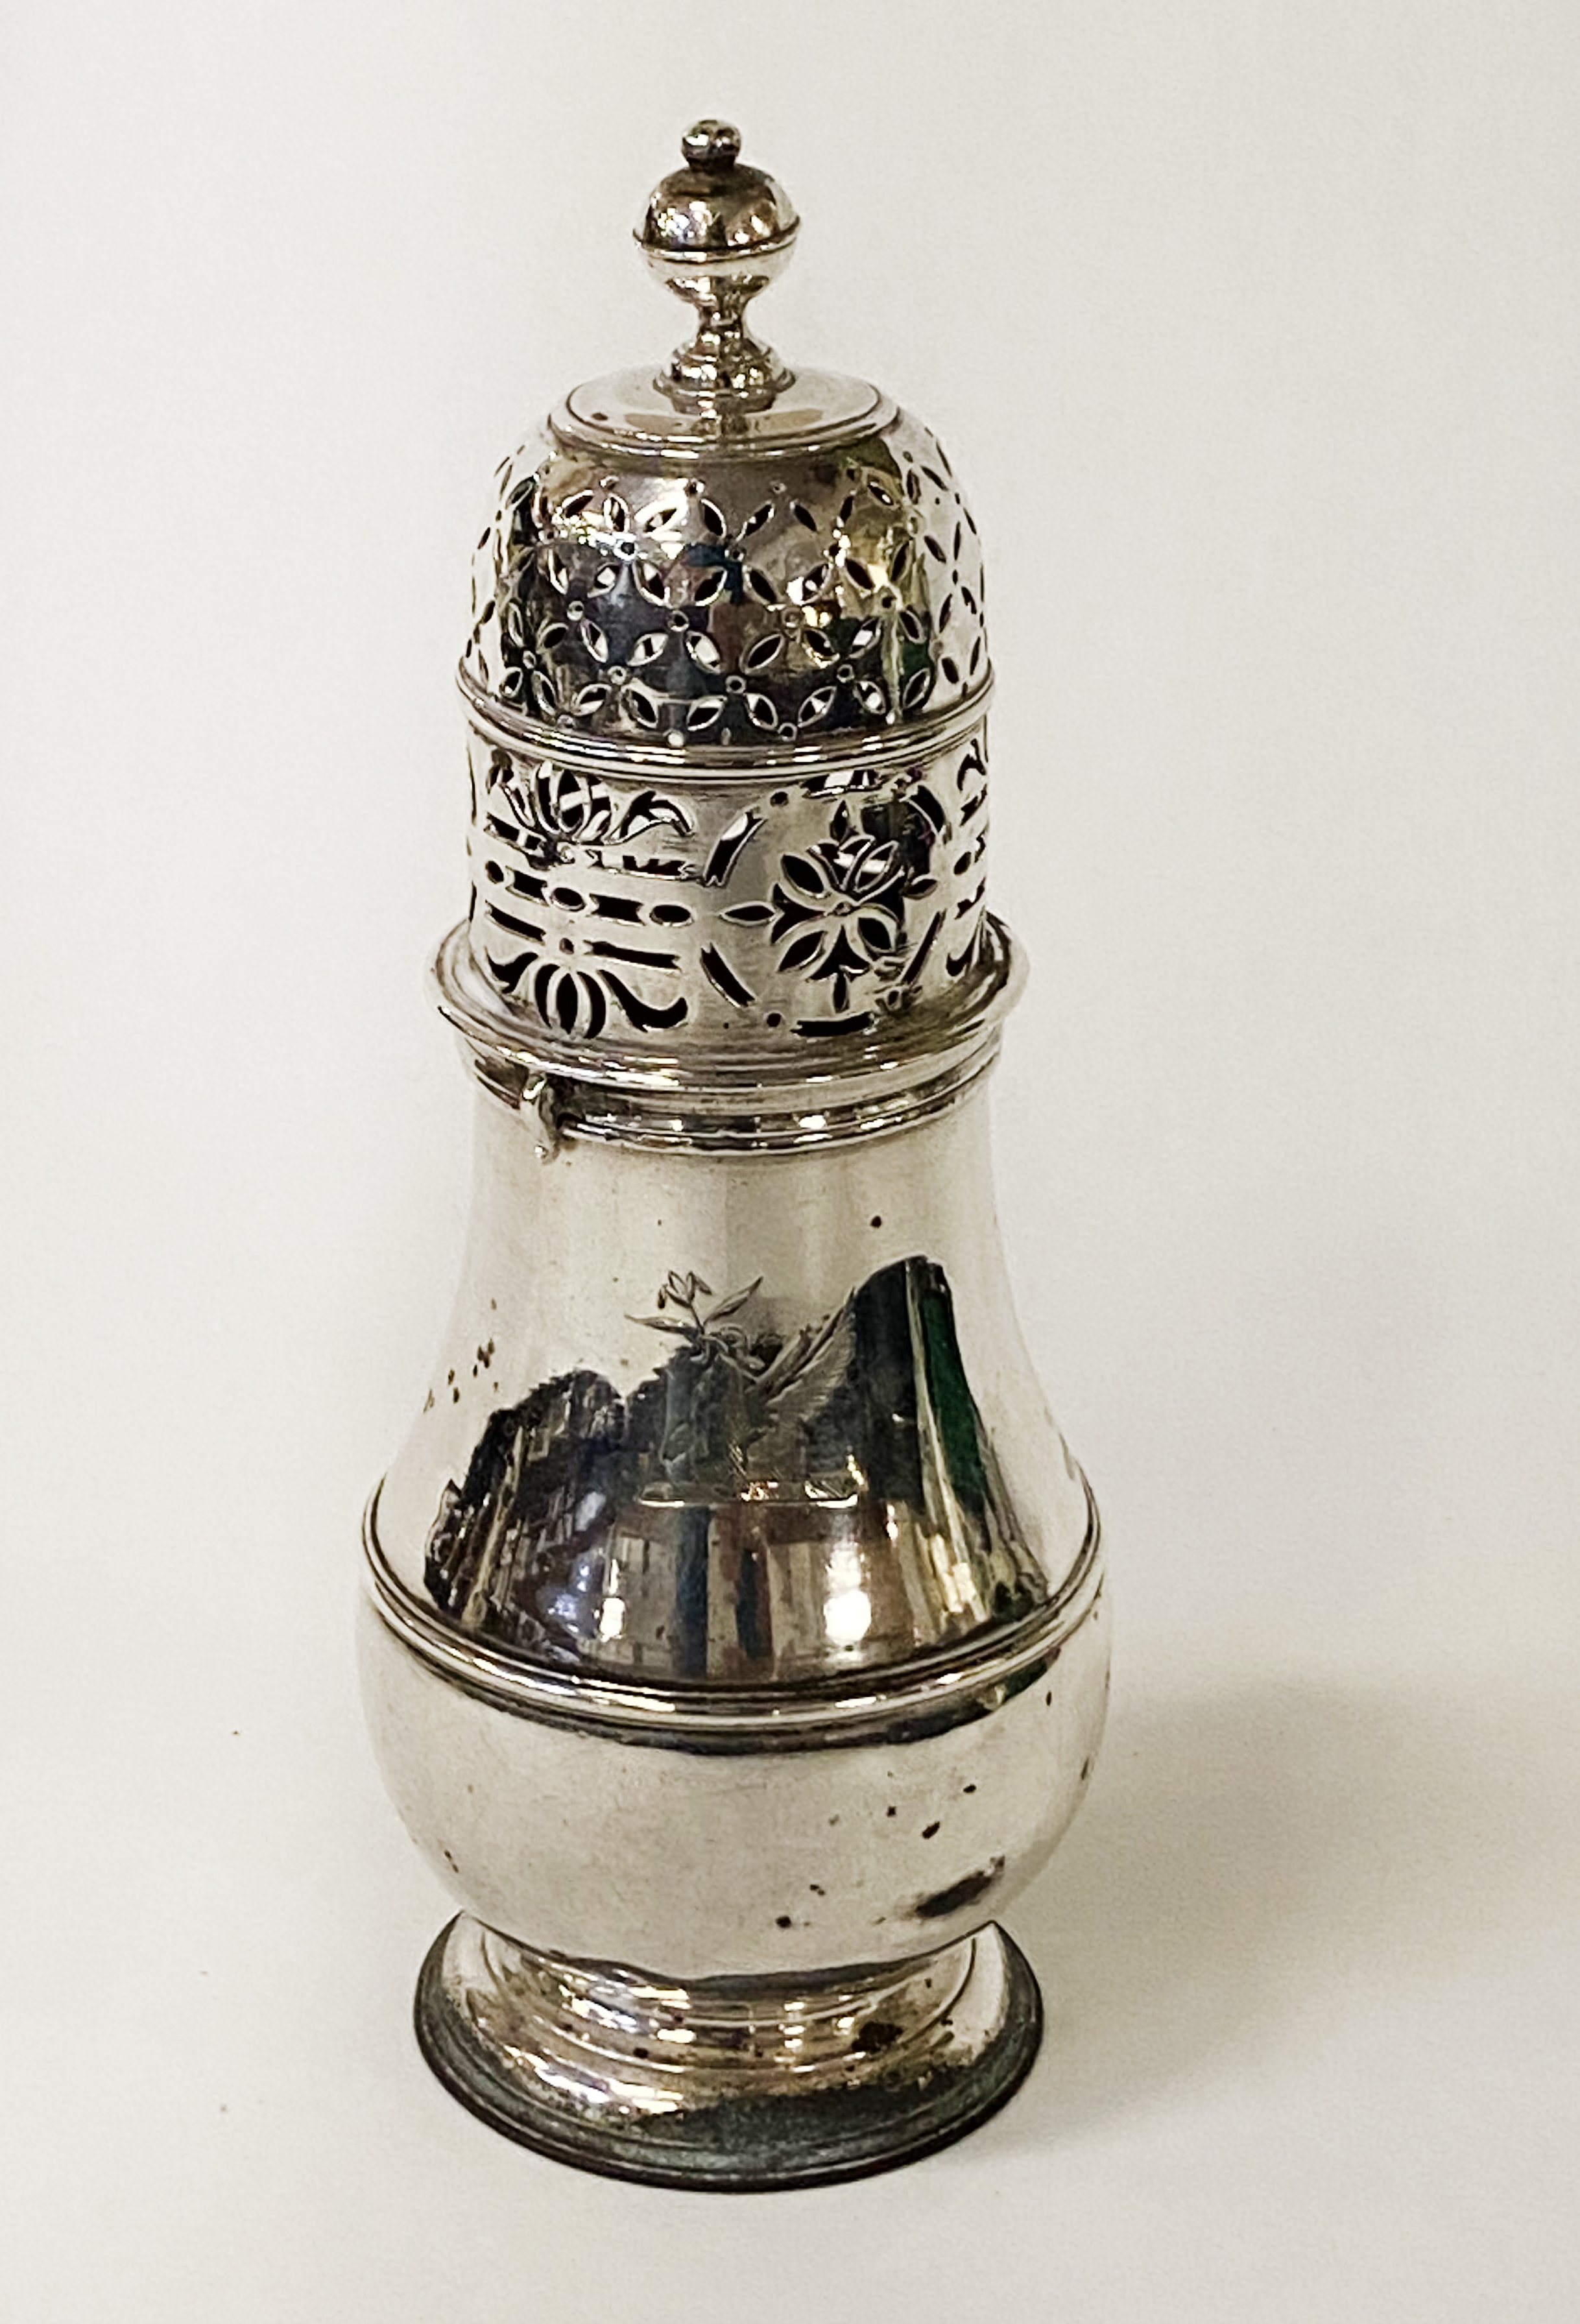 HM SILVER SUGAR SIFTER 7OZS APPROX 18CMS (H) APPROX